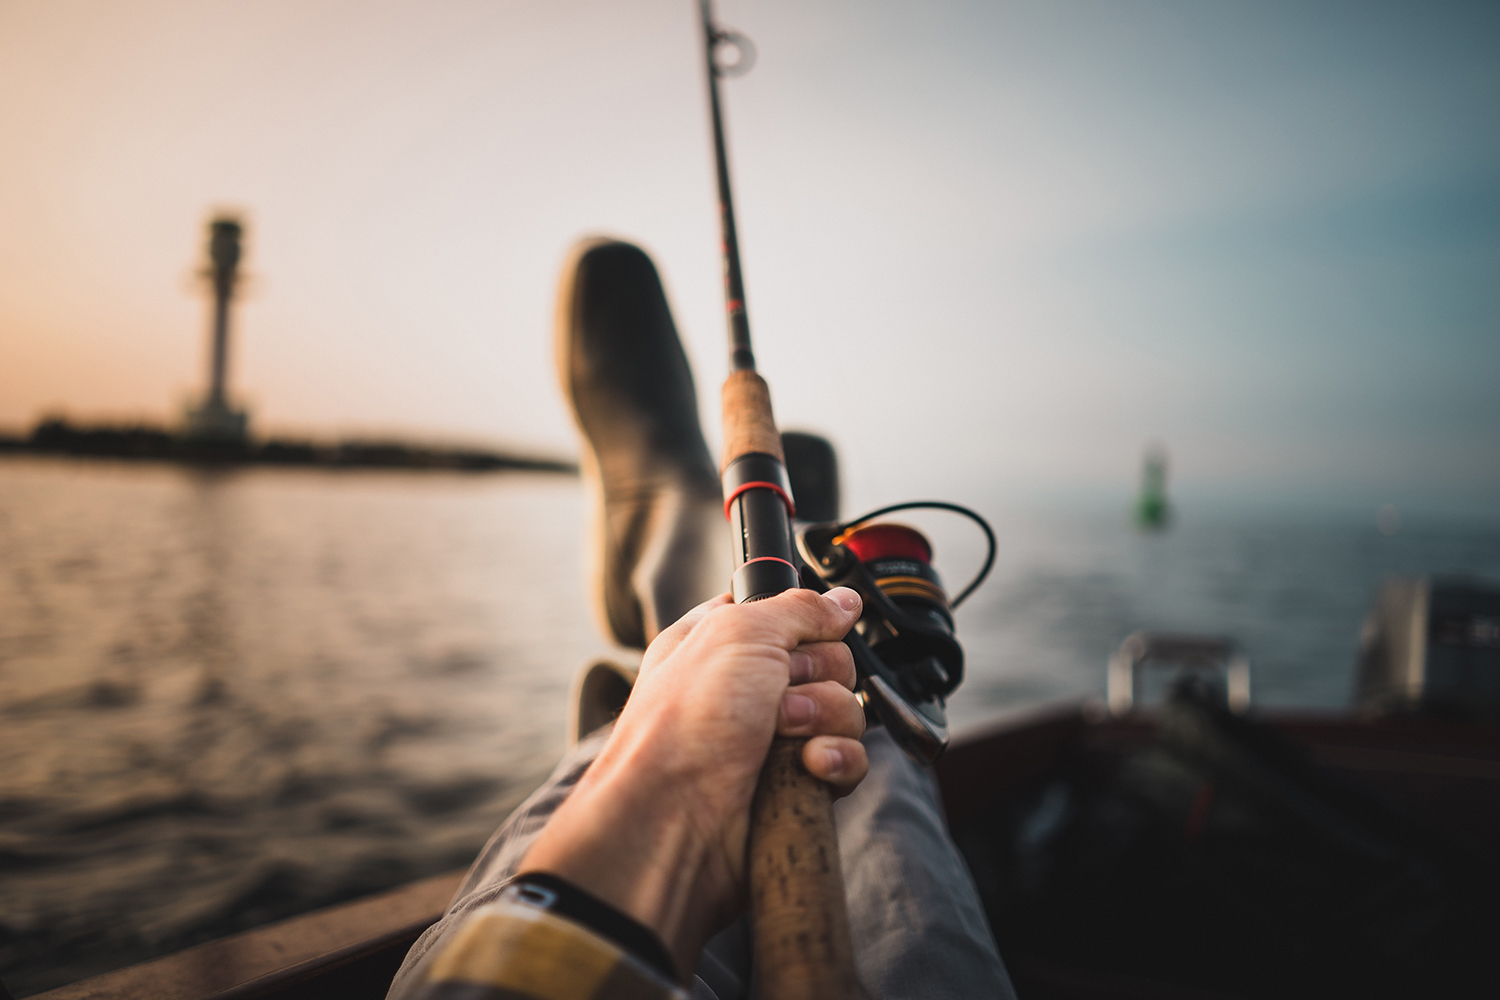 The 10 Best Fishing Rods for 2022 - The Manual